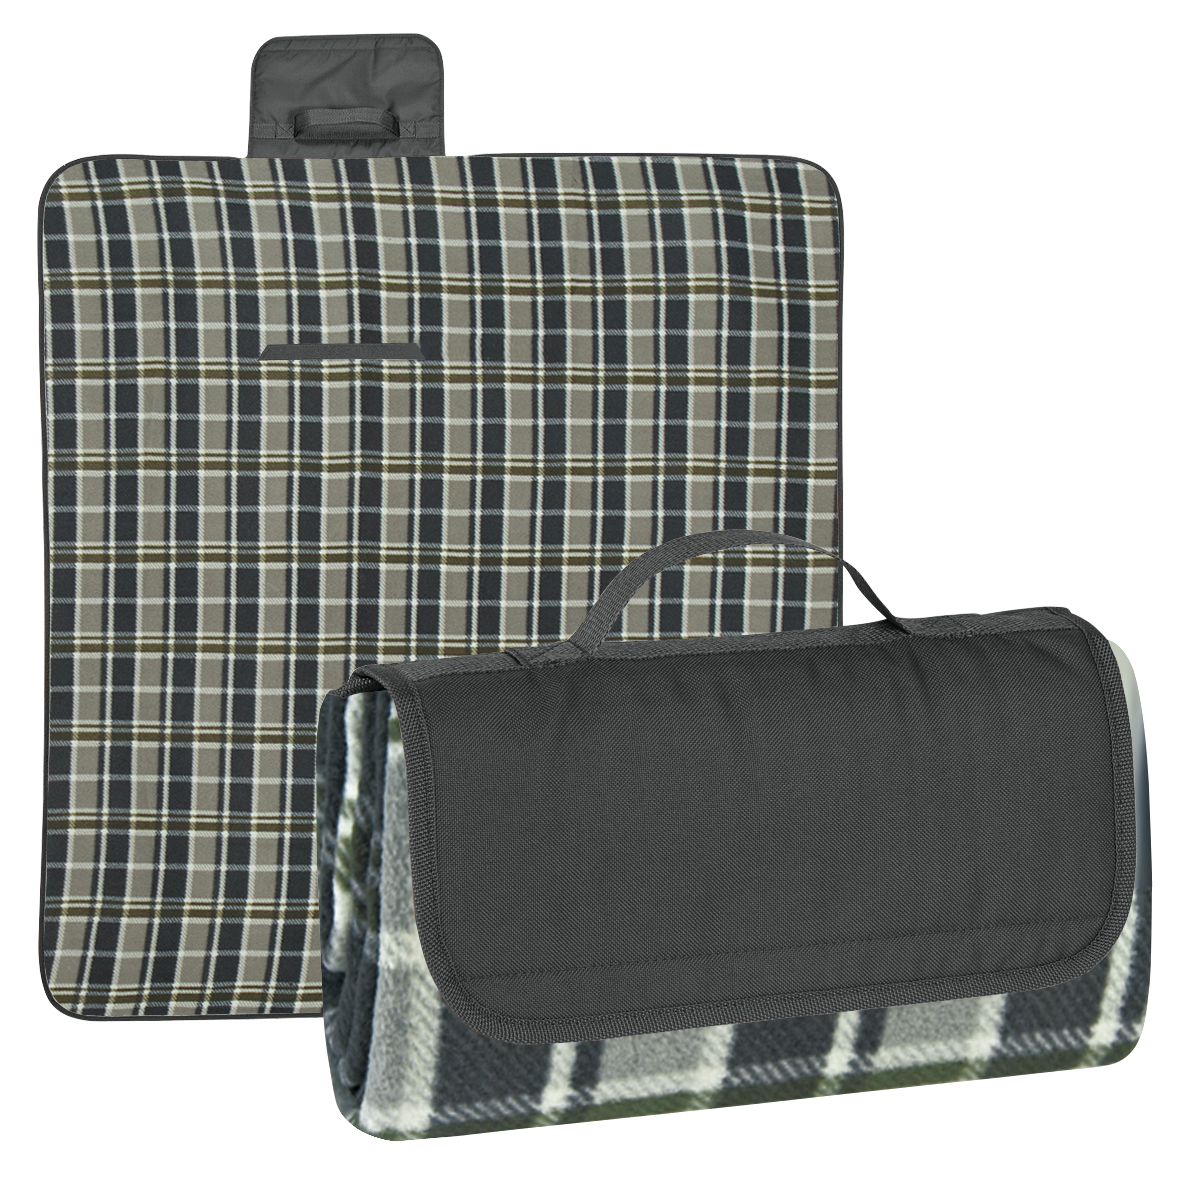 Black Flap with Black and Gray Plaid Blanket Roll-Up Picnic Blanket